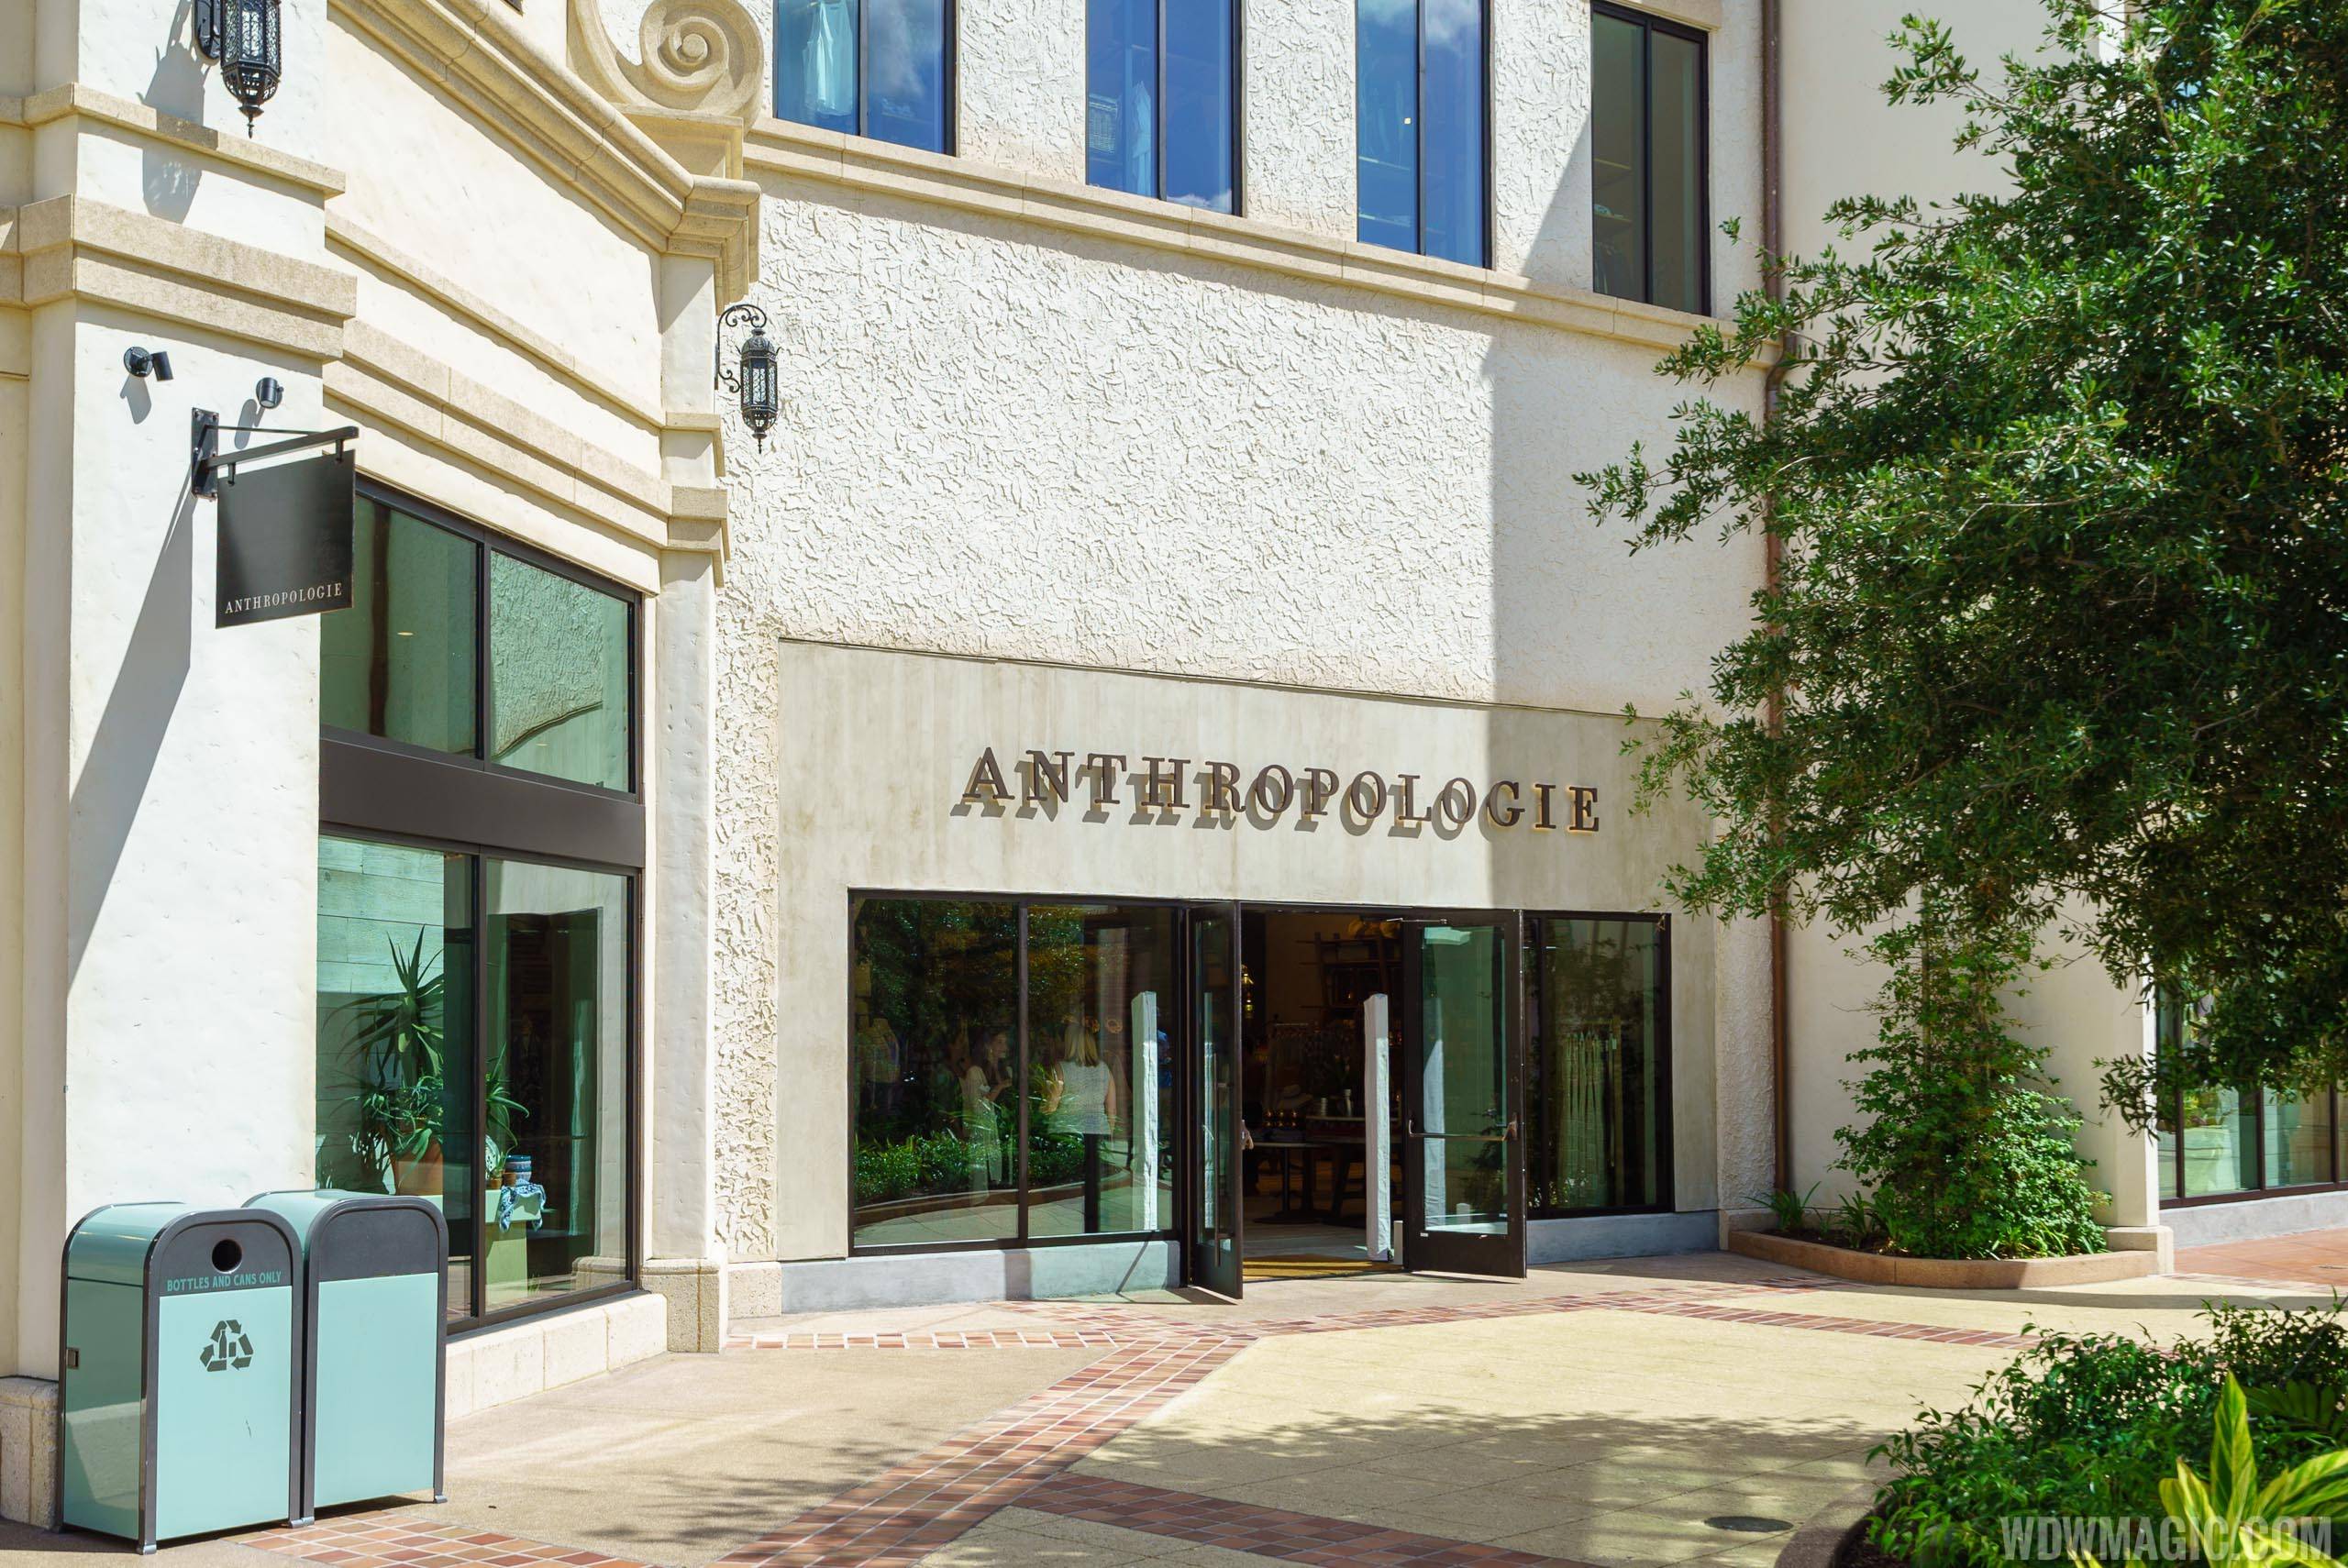 PHOTOS - Anthropologie opens two-story store at Disney Springs Town Center